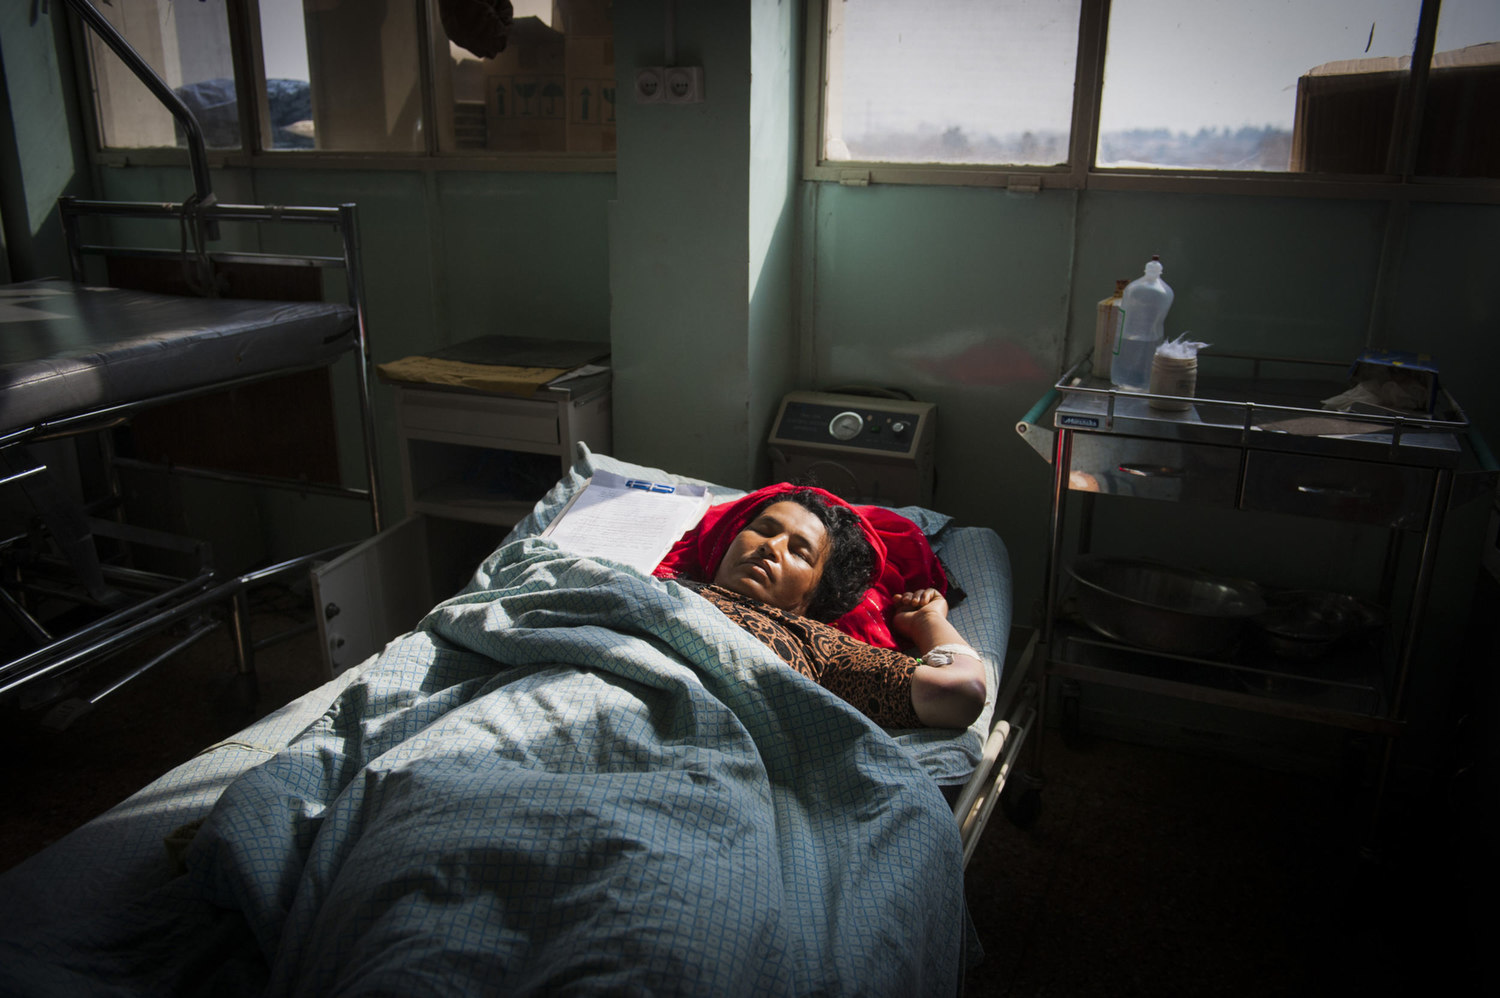  Nuraya rests in the Womens ICU of Wazir Akbahan hospital after a car accident. After five days she has yet to regain consciousness and has broken both her legs and arm.  Non-fatal accidents in Afghanistan often lead to death due to inadequate medica